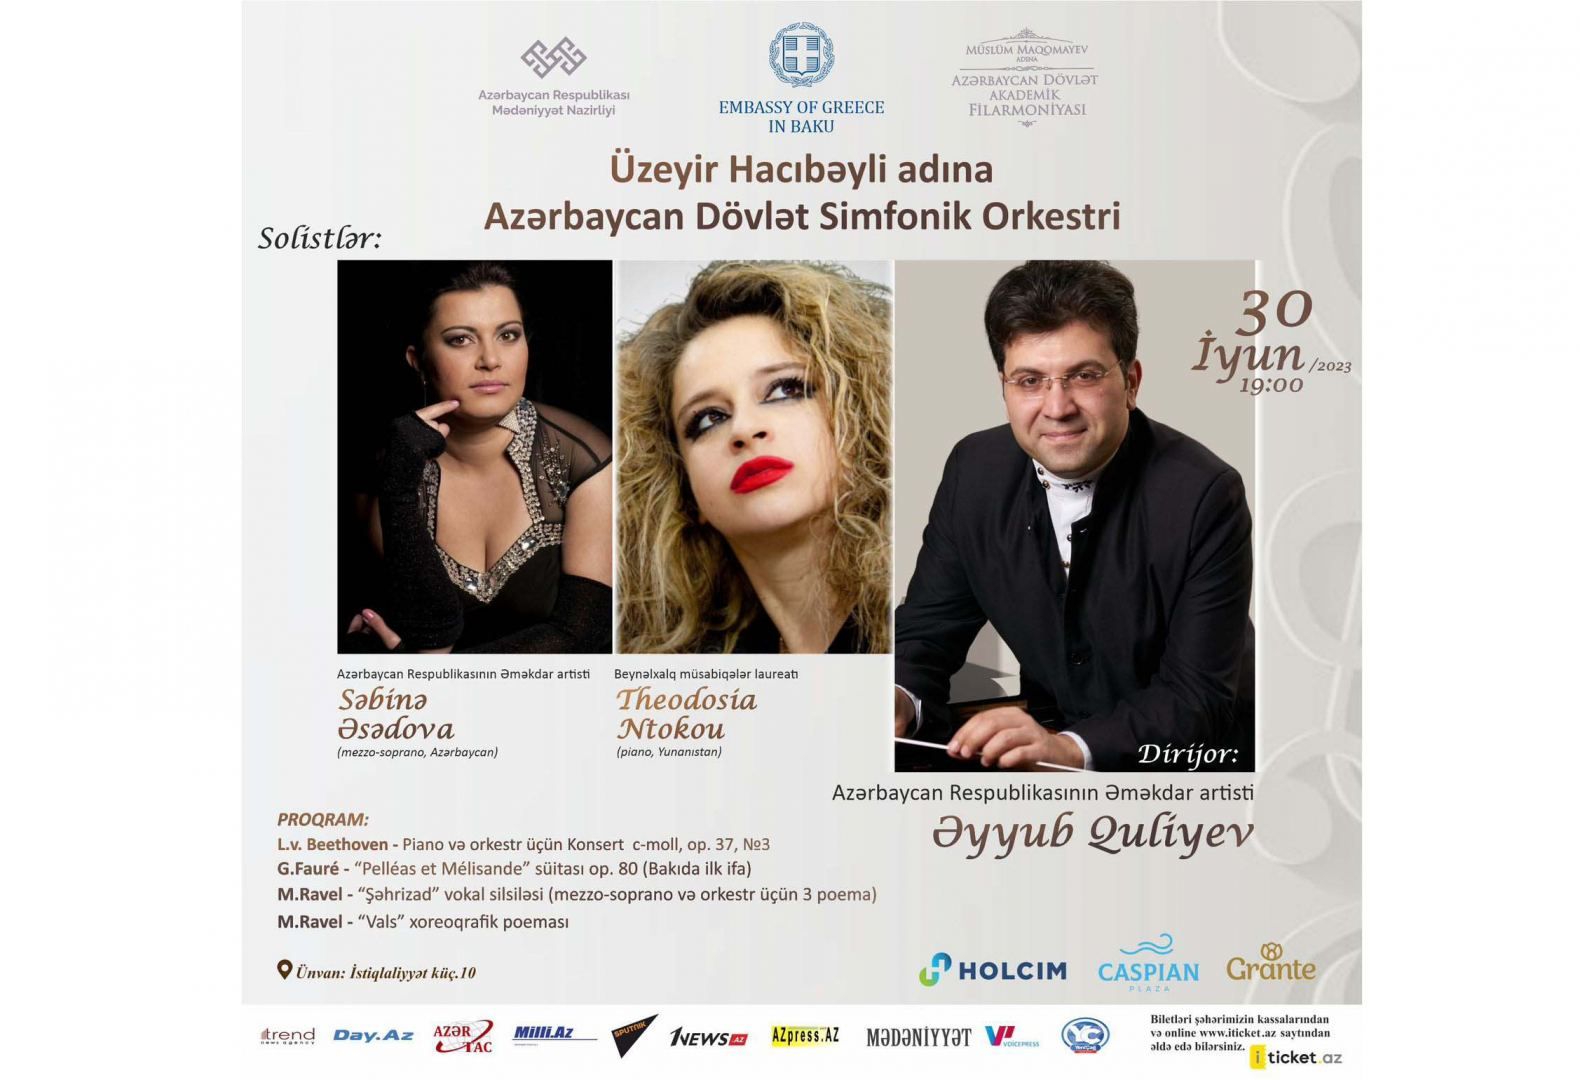 World-renowned opera singer and musician to perform in Baku